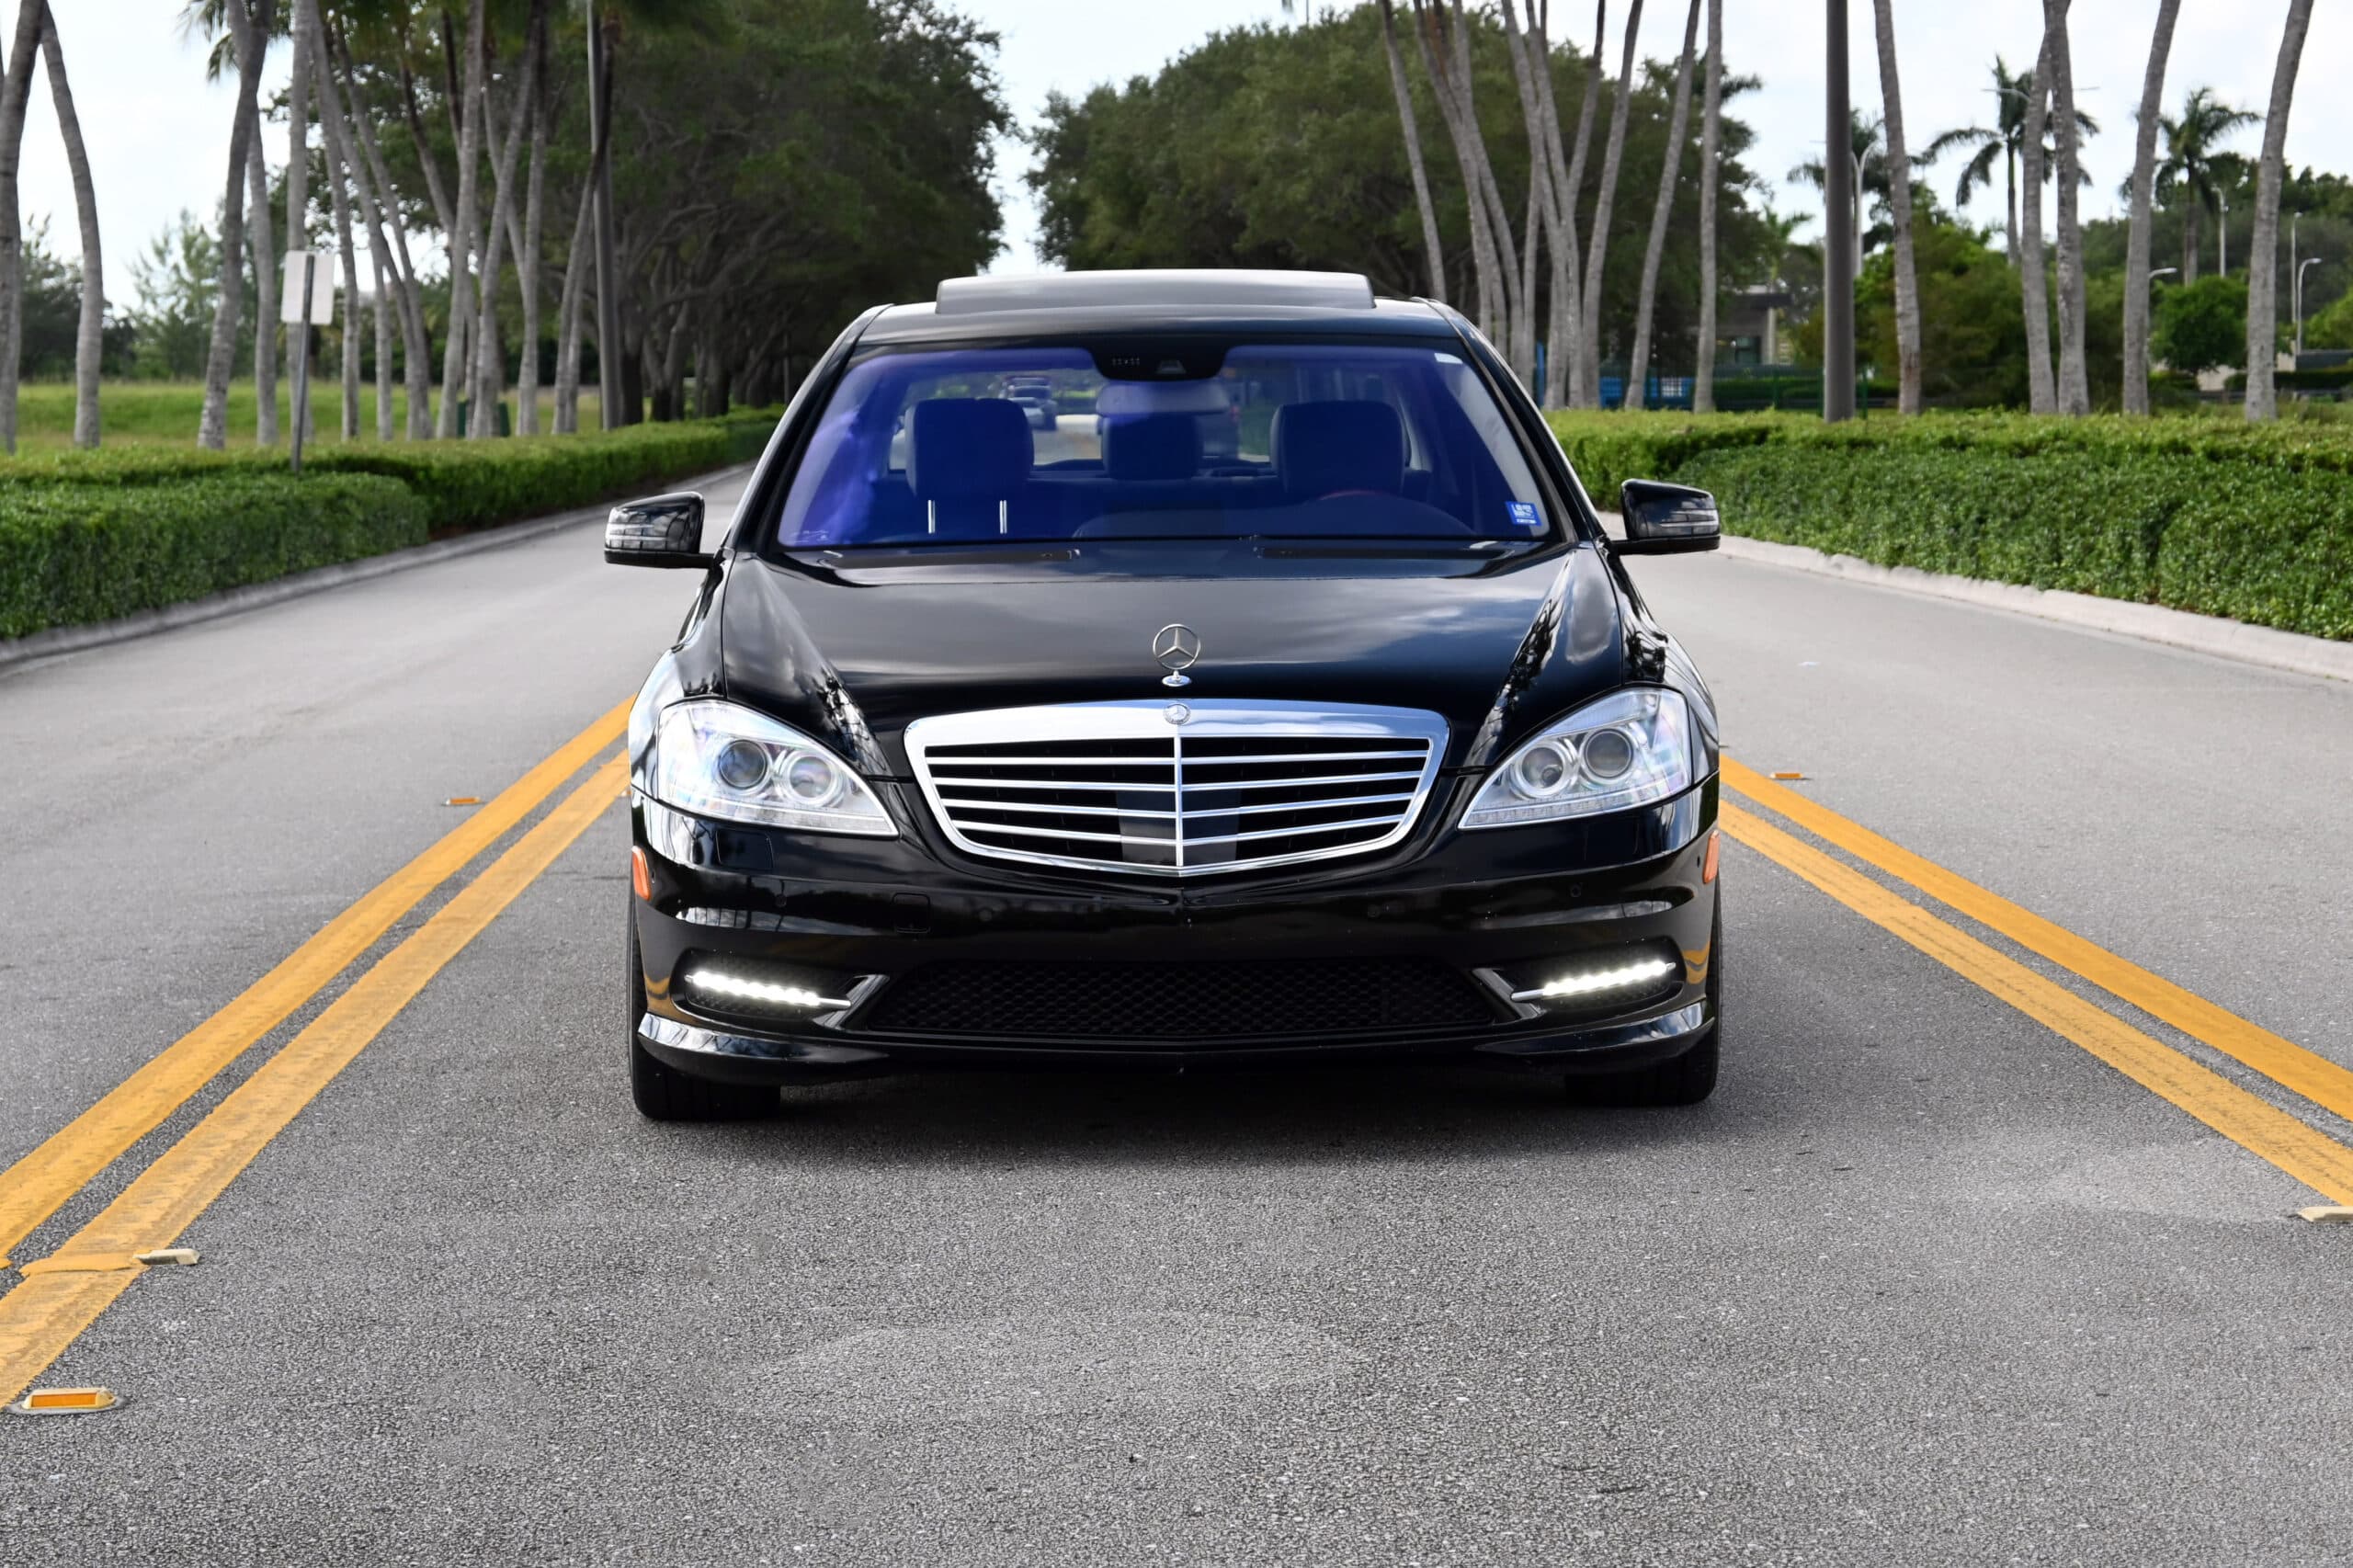 2013 MERCEDES S550, LOW MILES, SERVICED, S63 AMG WHEELS, LOADED WITH OPTIONS, FRESHLY SEVICED